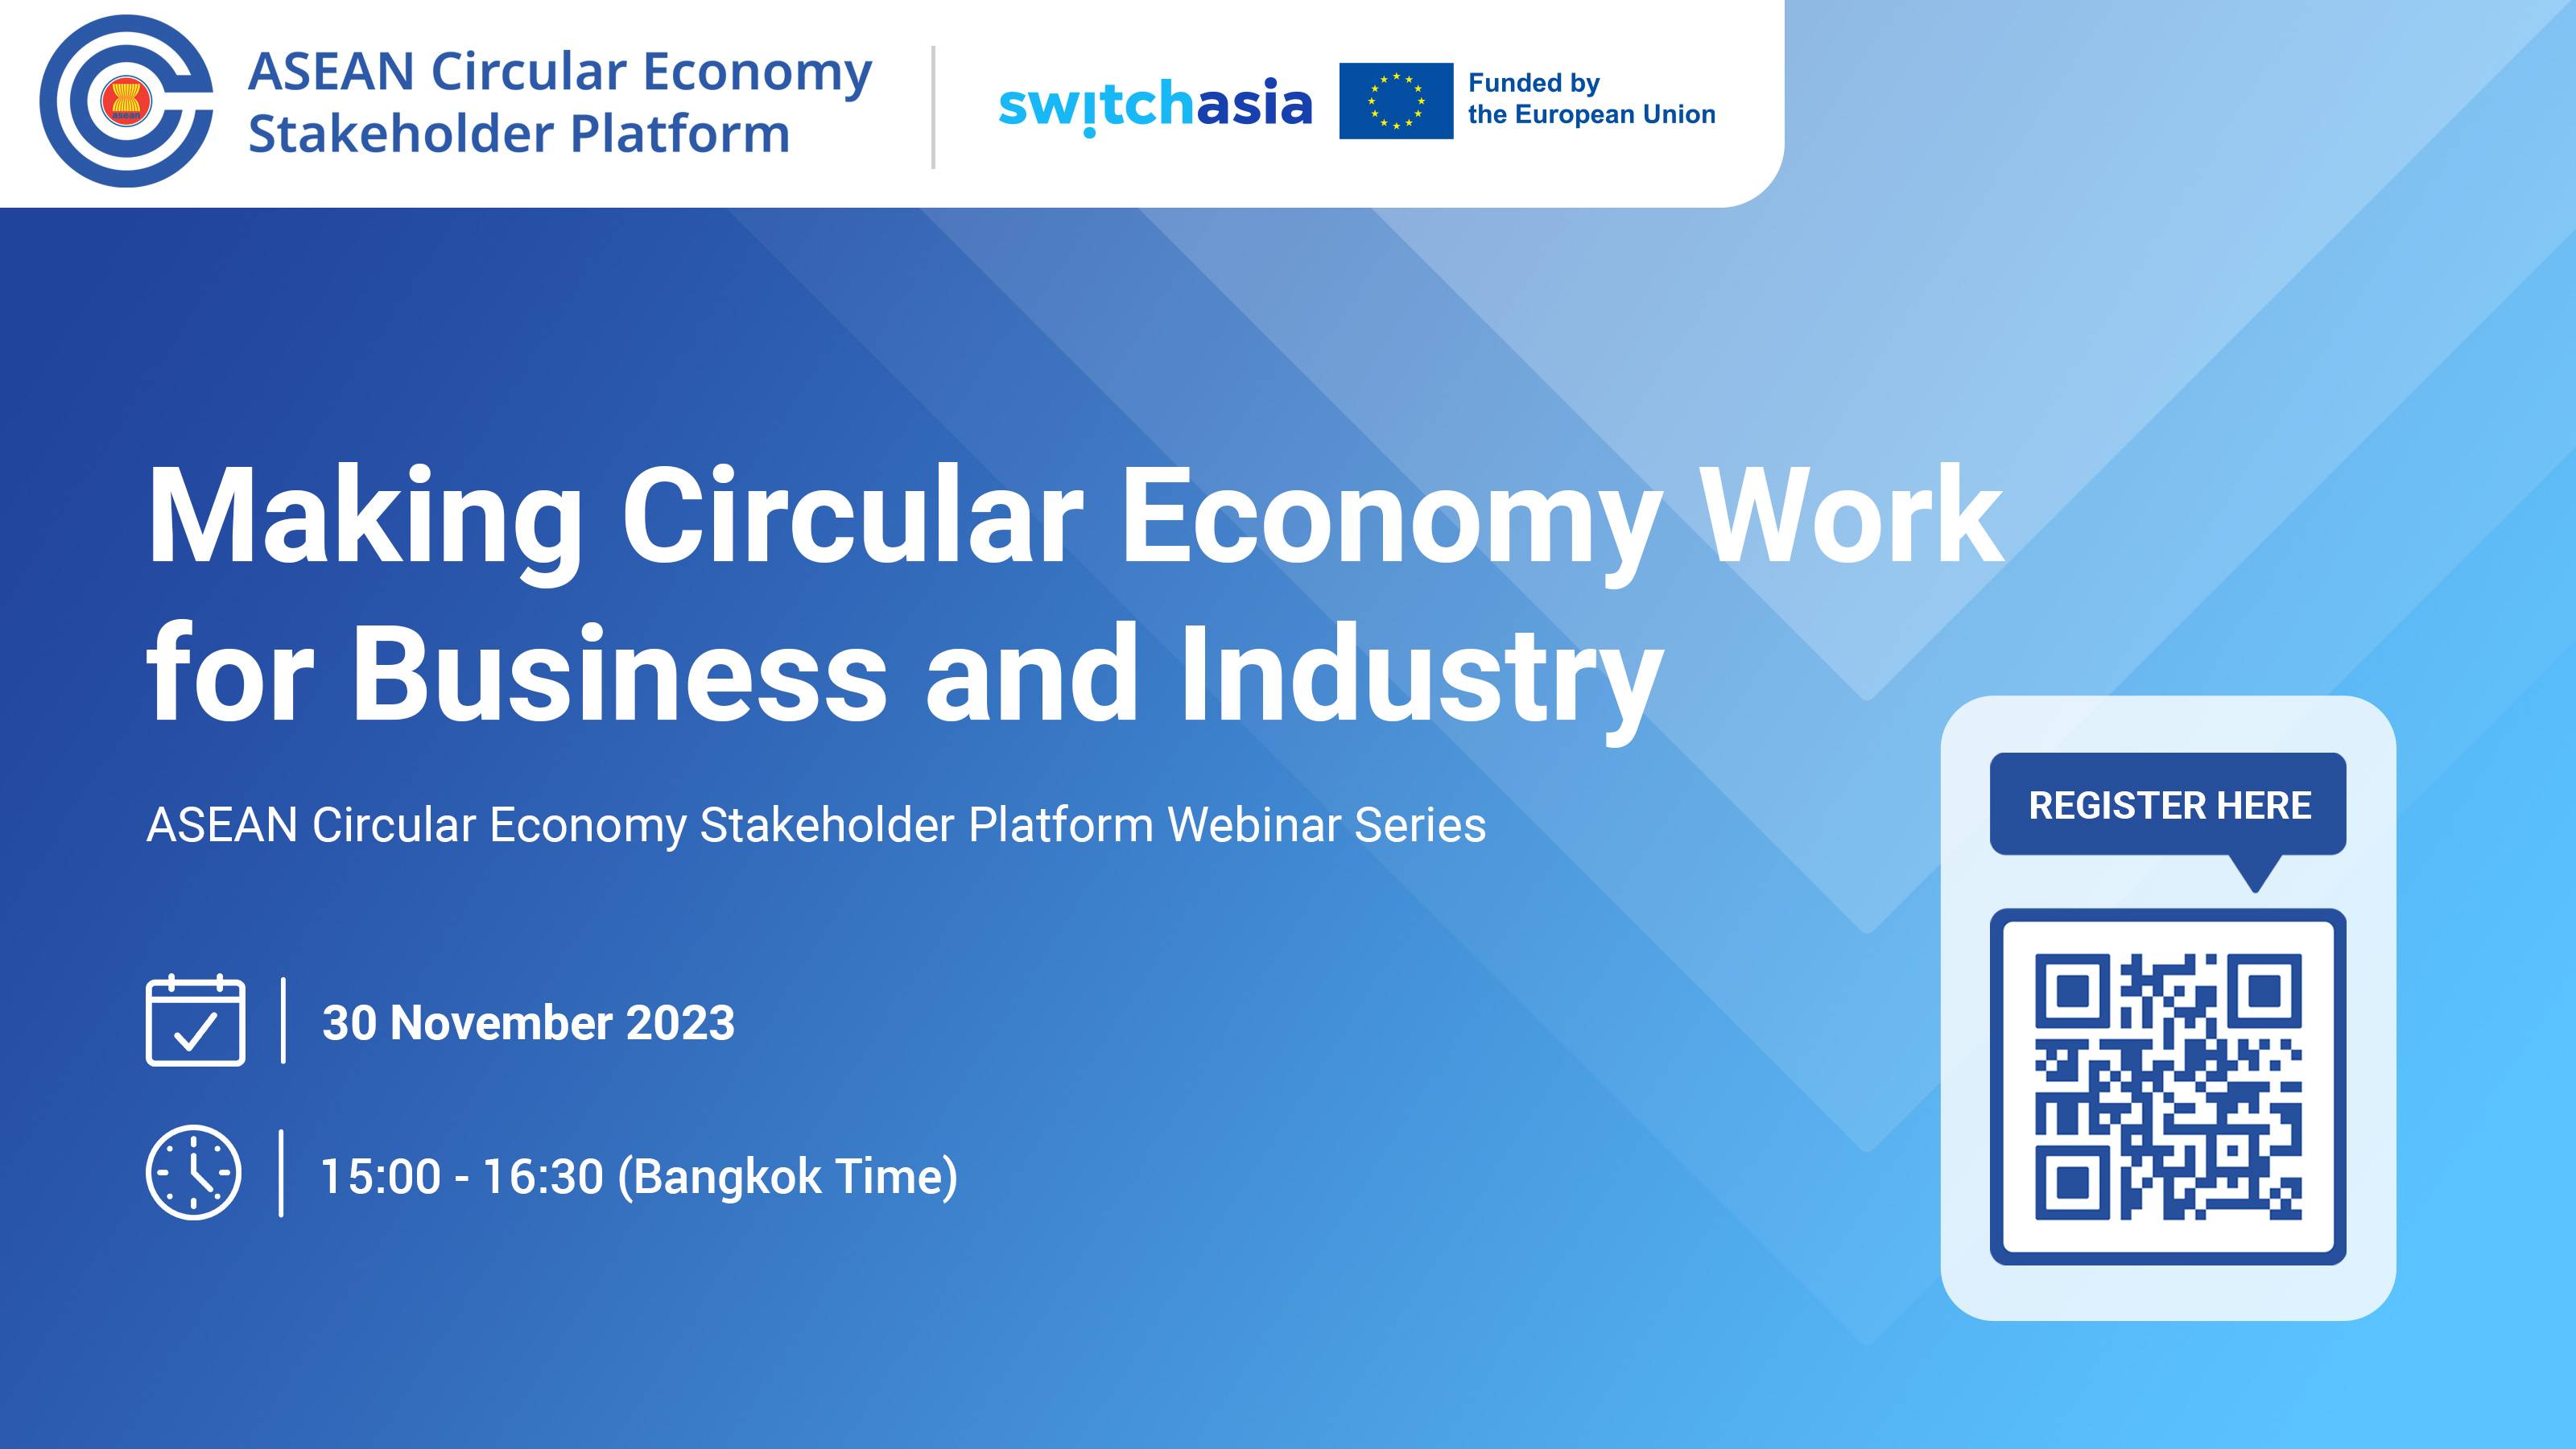 Making Circular Economy Work for Business and Industry